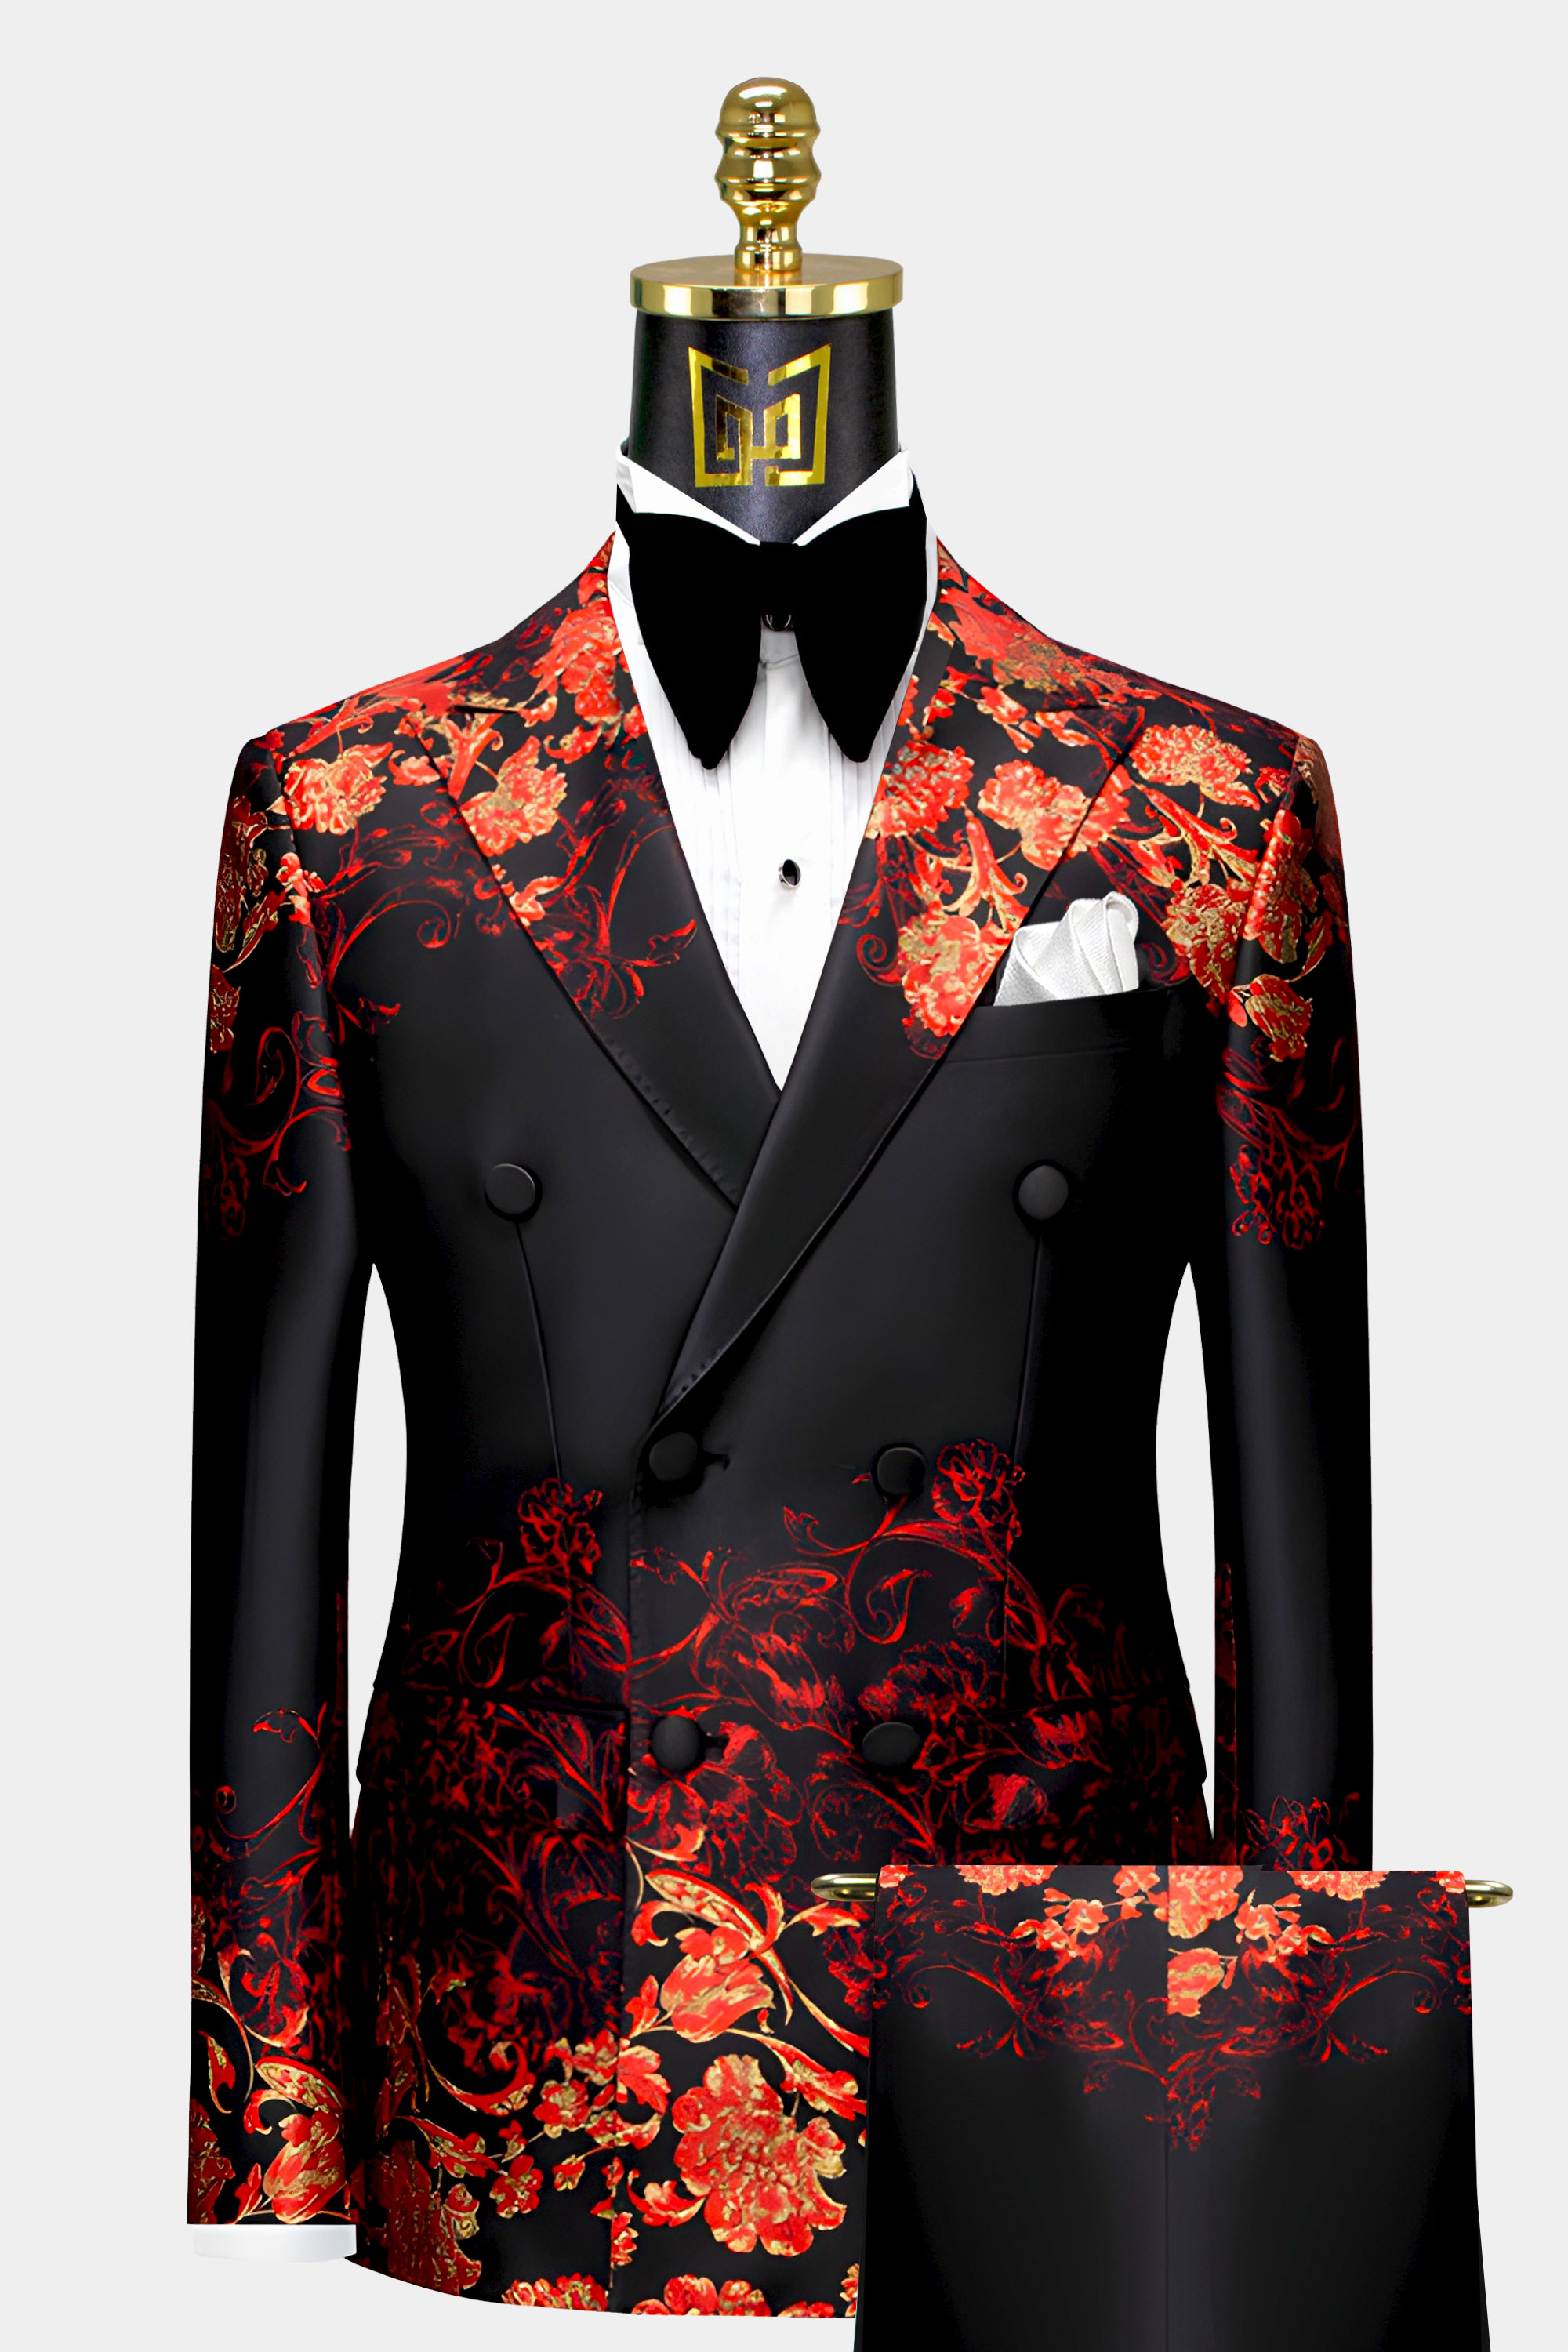 Double Breasted Cremon Floral Red Black & Gold Suit - 3 Piece